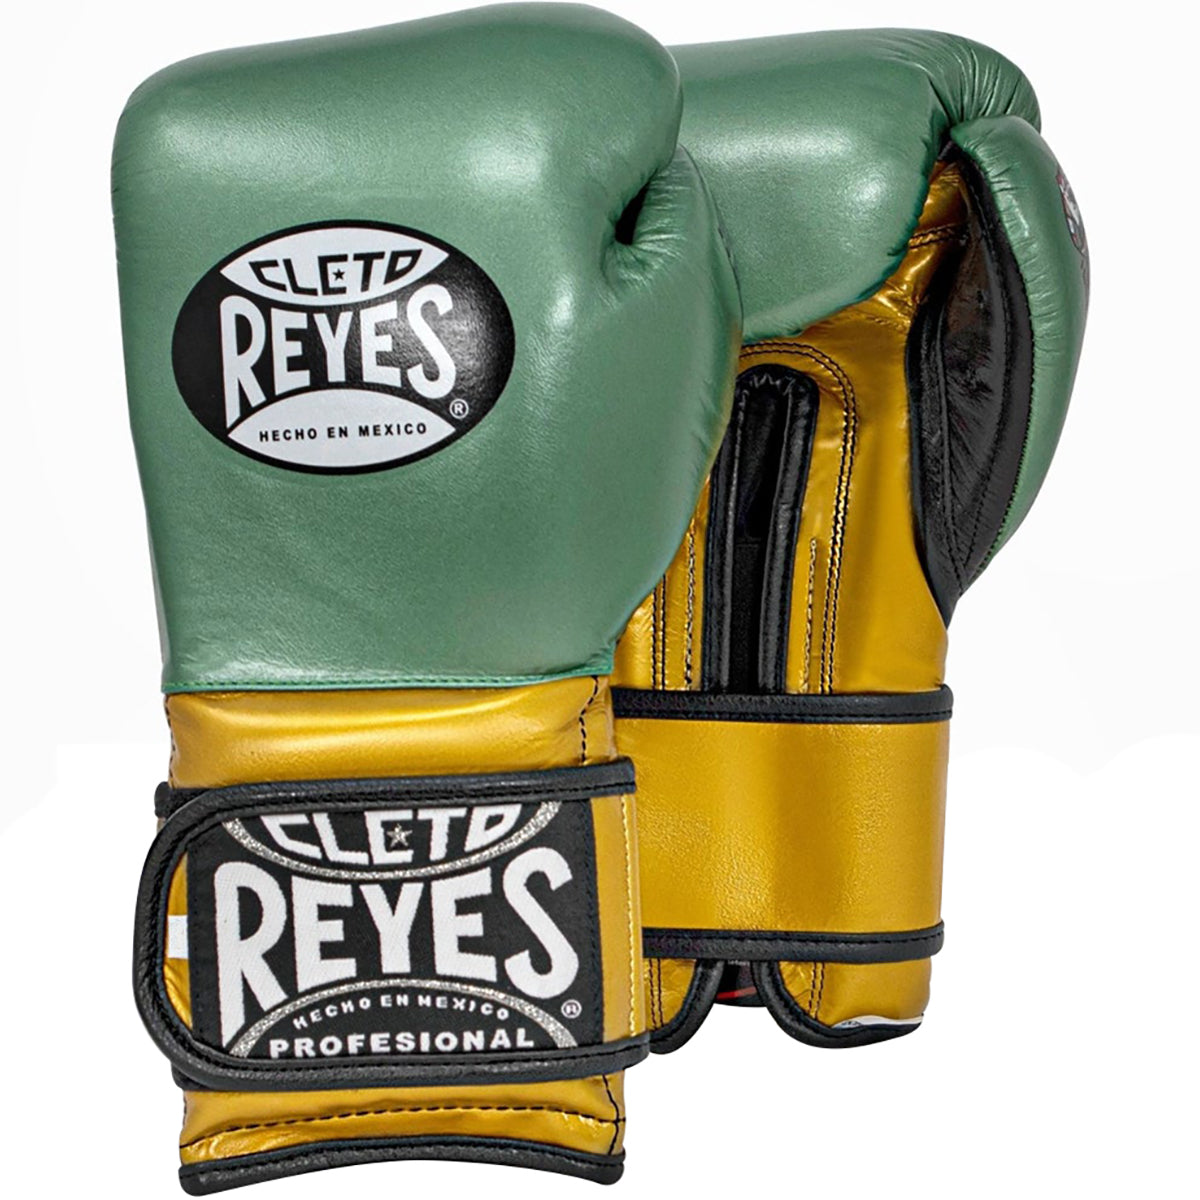 Cleto Reyes Hook and Loop Training Boxing Gloves - WBC Edition Cleto Reyes